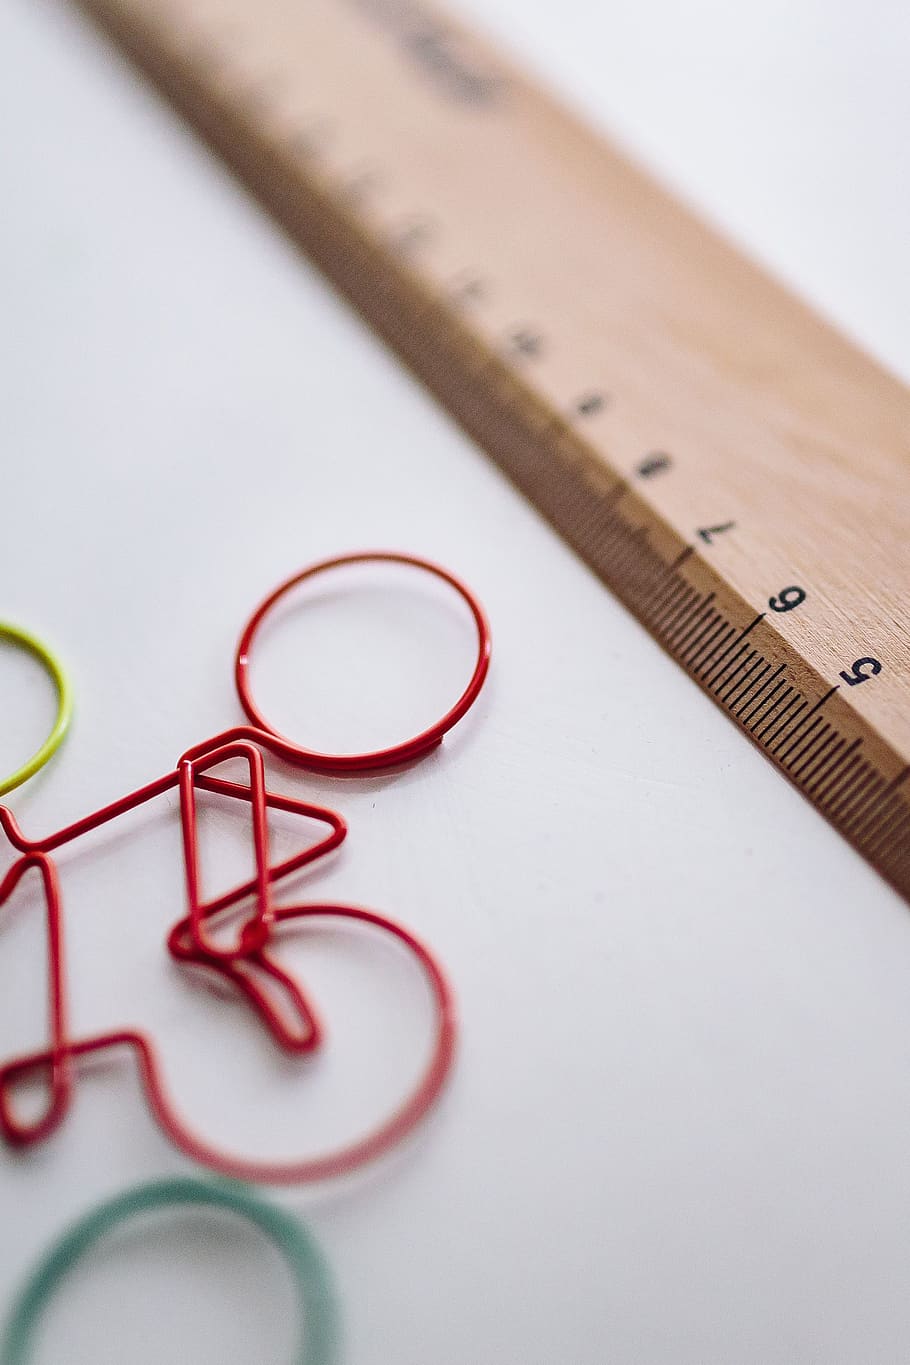 wooden, paper clip, ruler, stationery, Bicycle, paper, clips, indoors, still life, selective focus